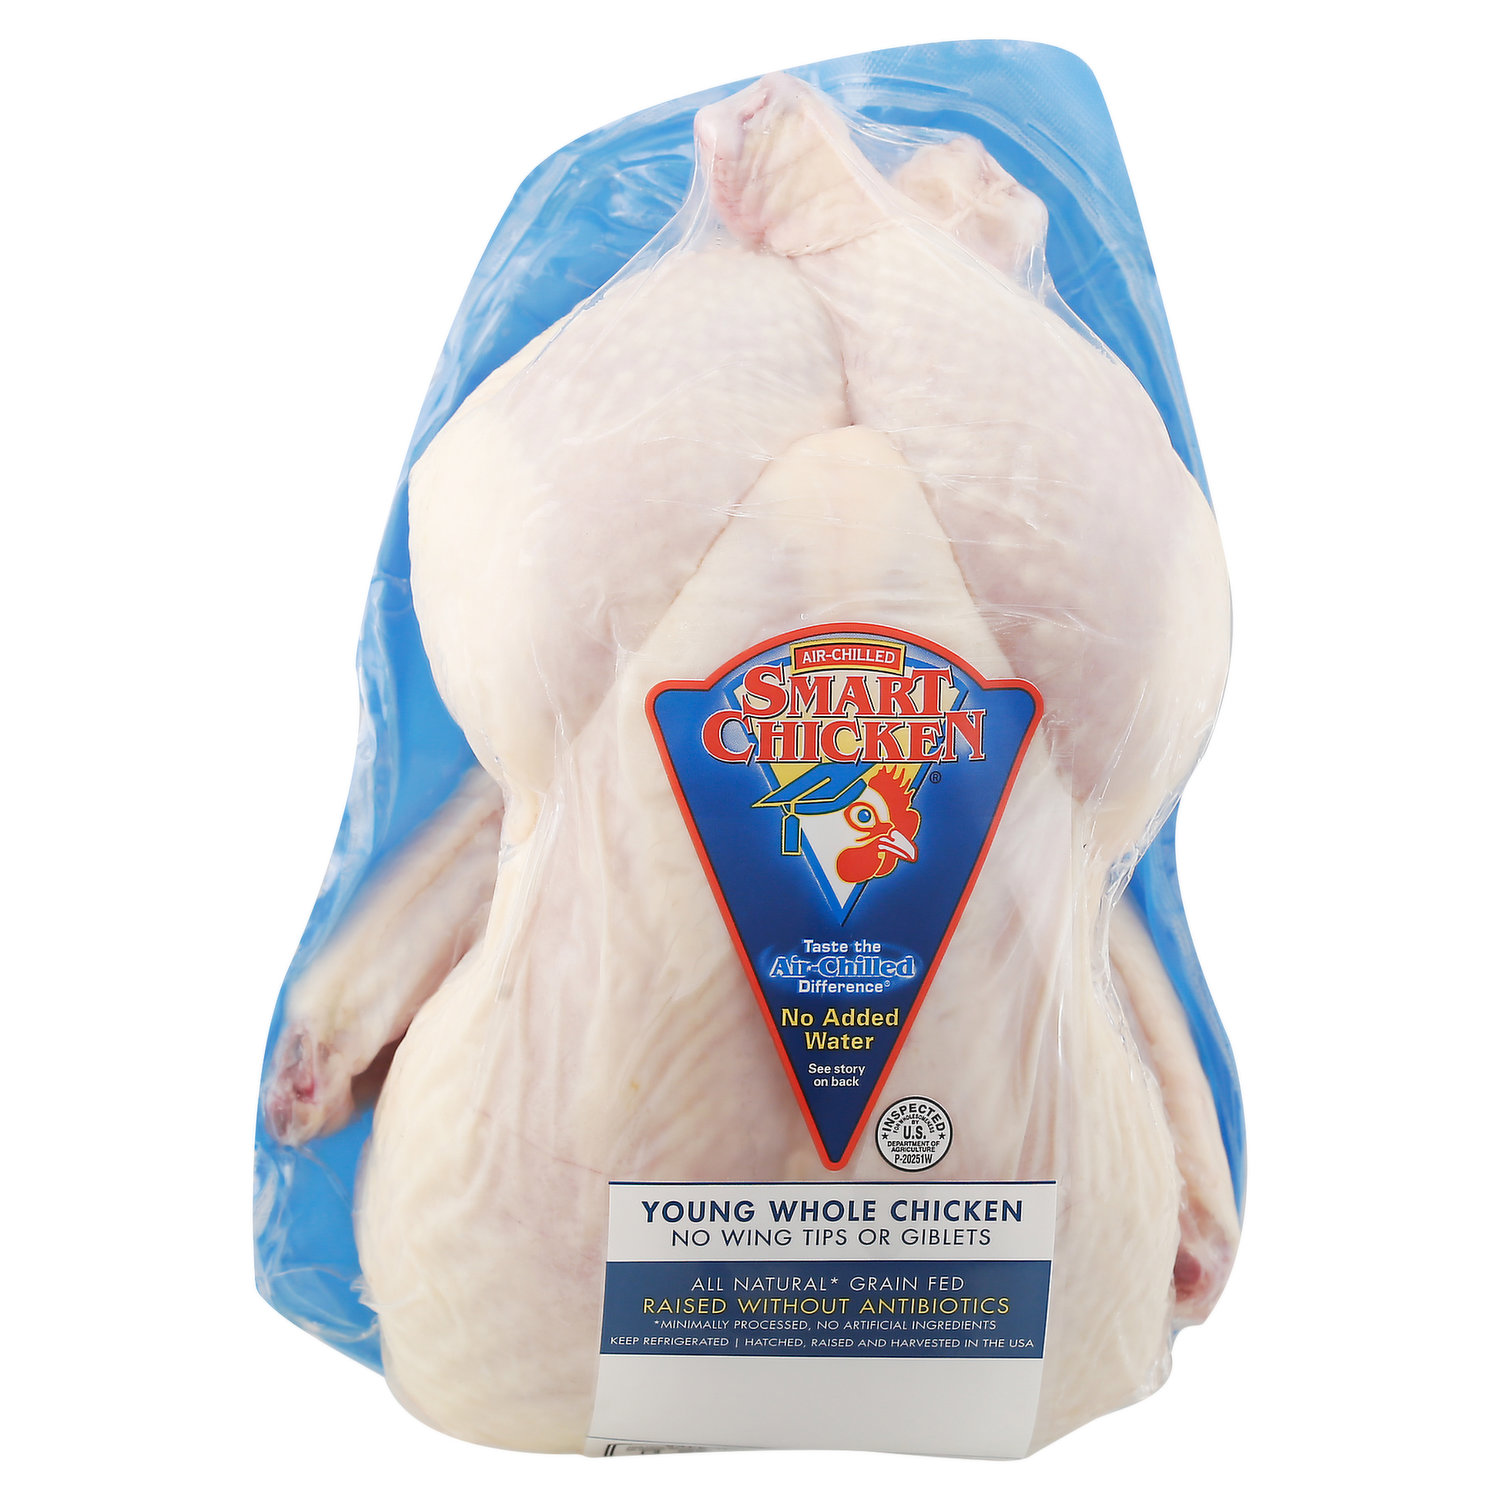 GJ's Chicken - Fresh chilled whole chicken for sale! Pm or